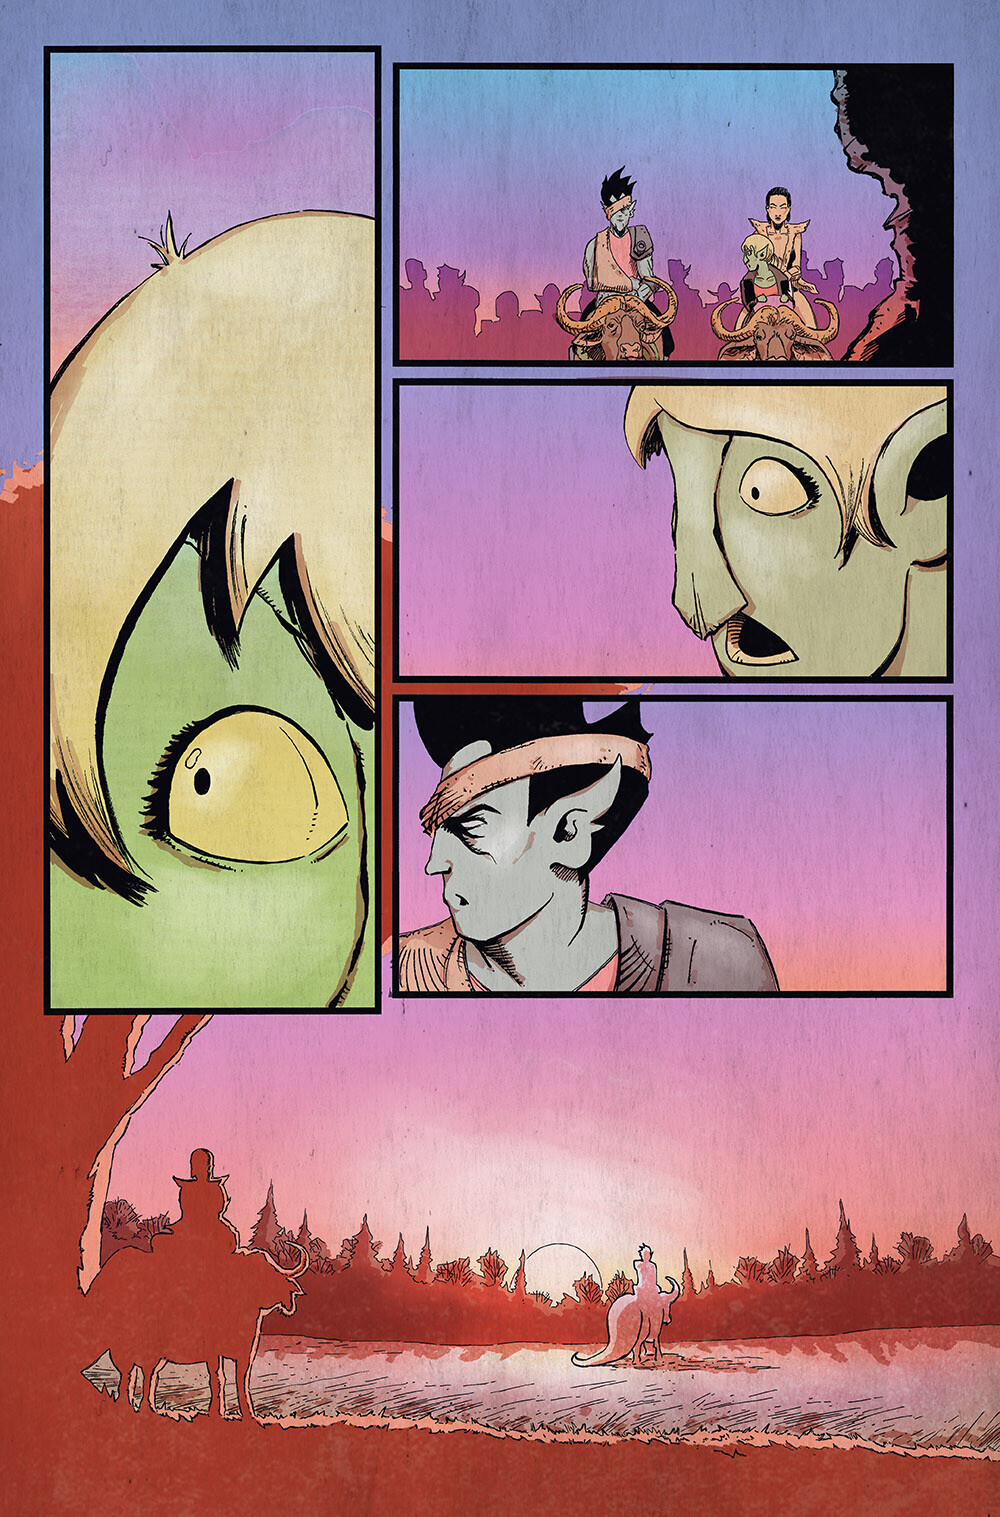 Vagrant Queen: A Planet Called Doom #4 pg 07